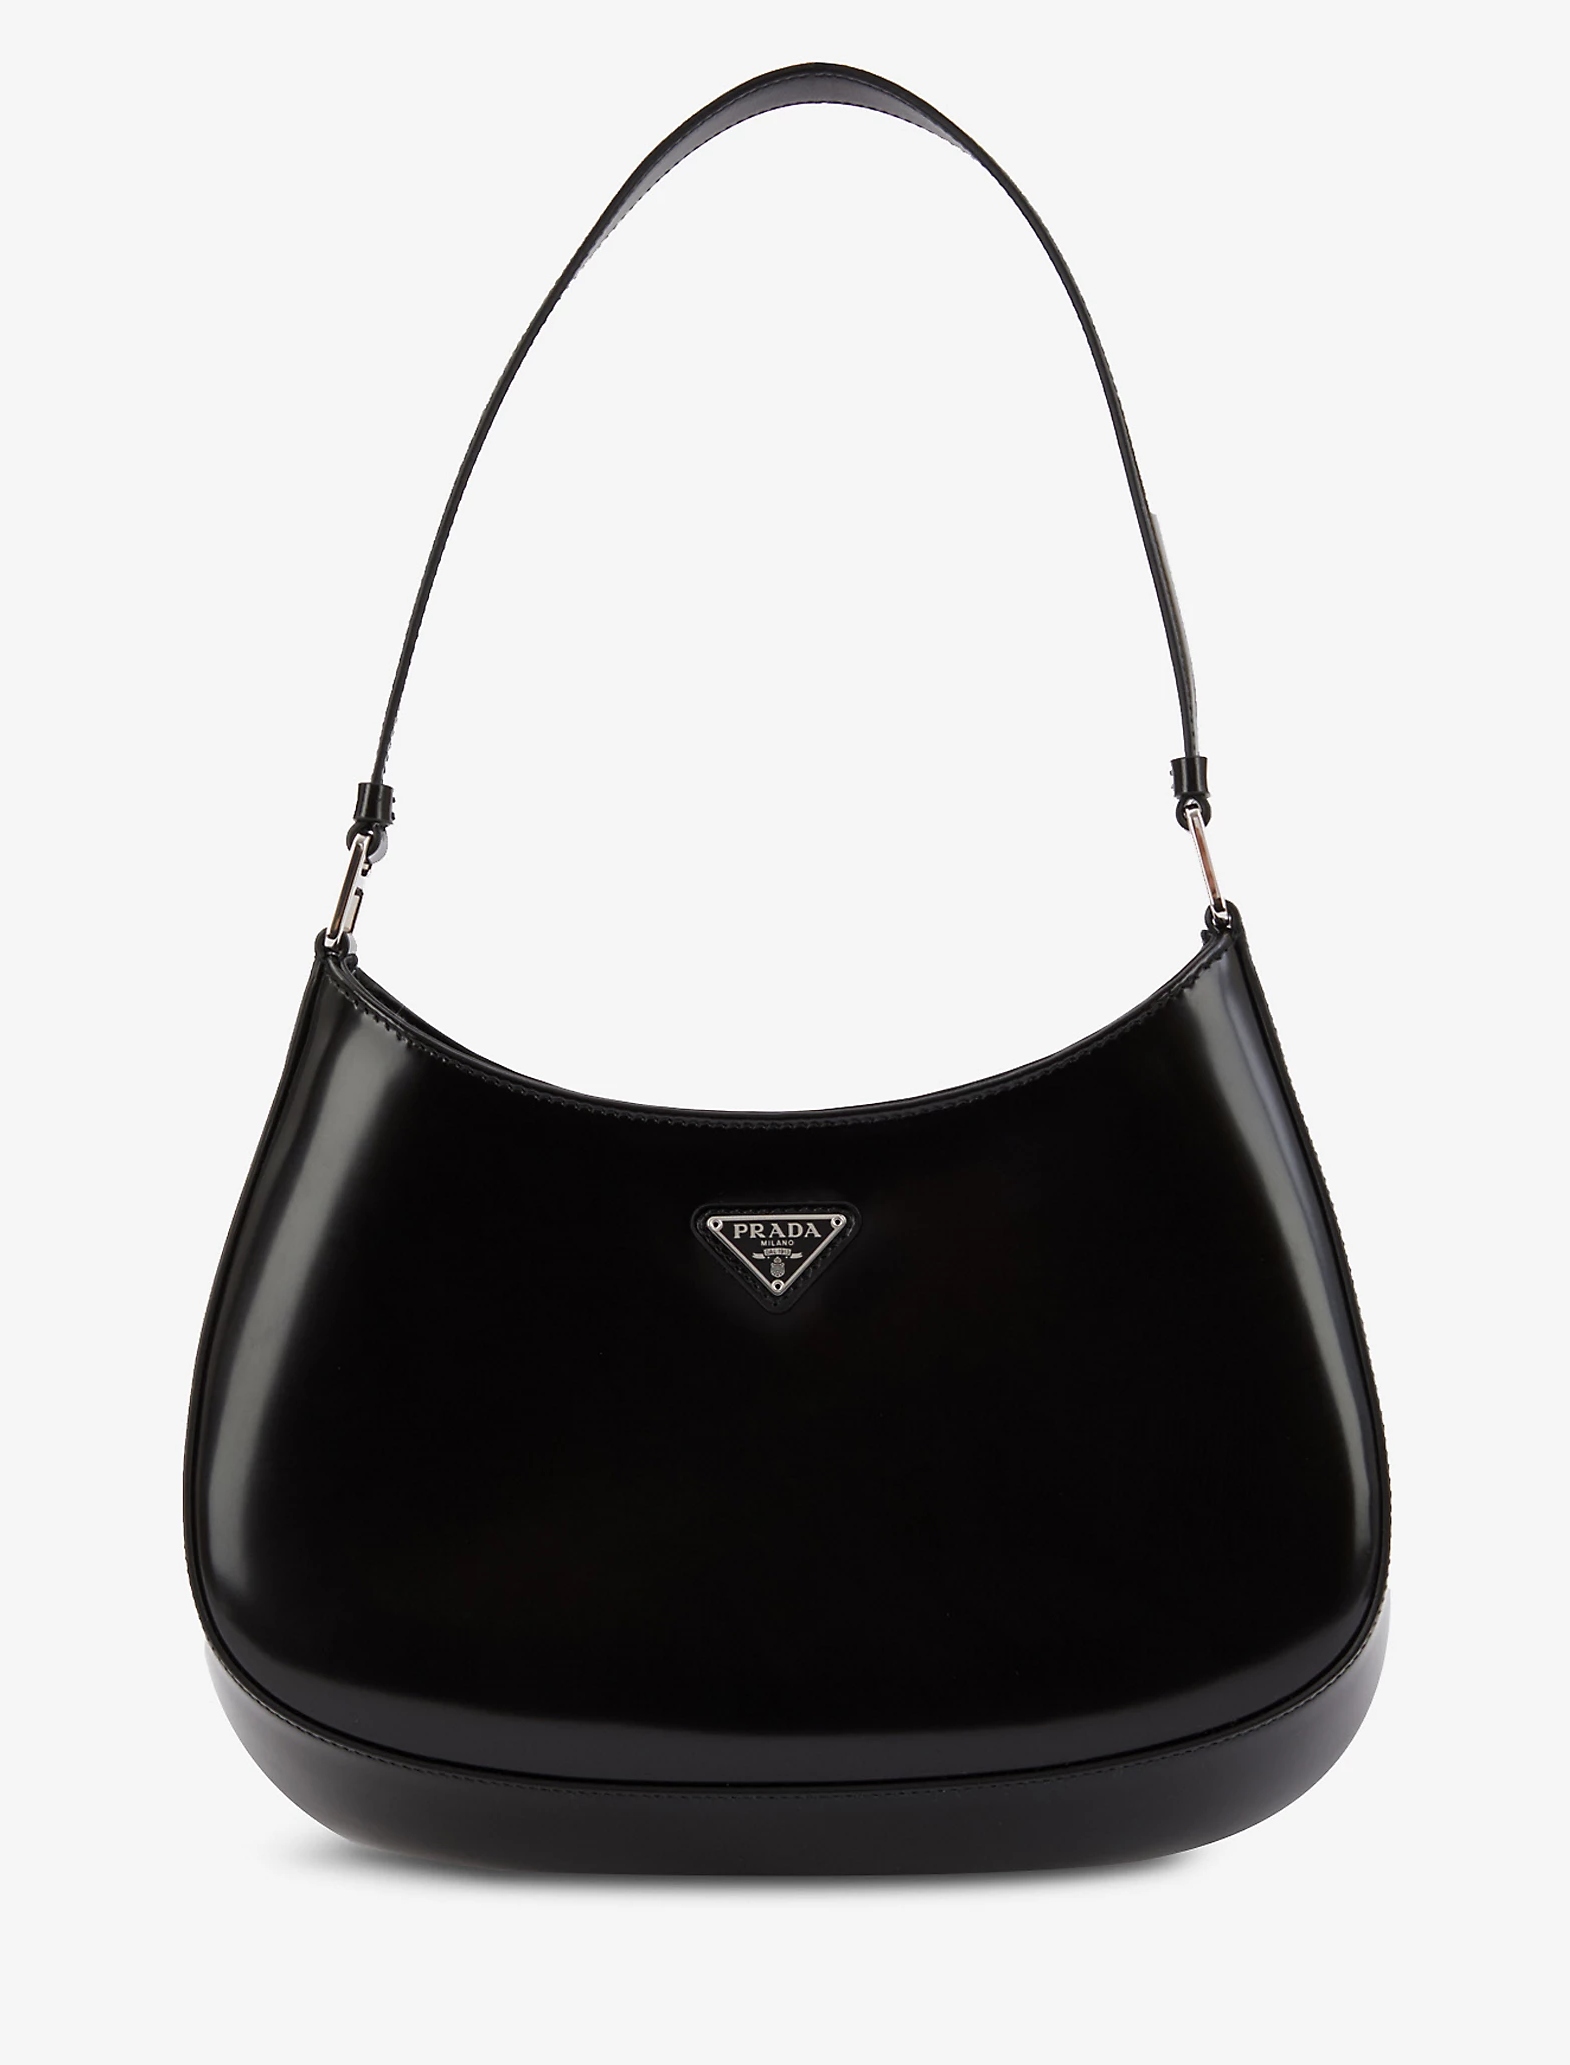 This Prada-inspired bag from M&S is so classic for just £25